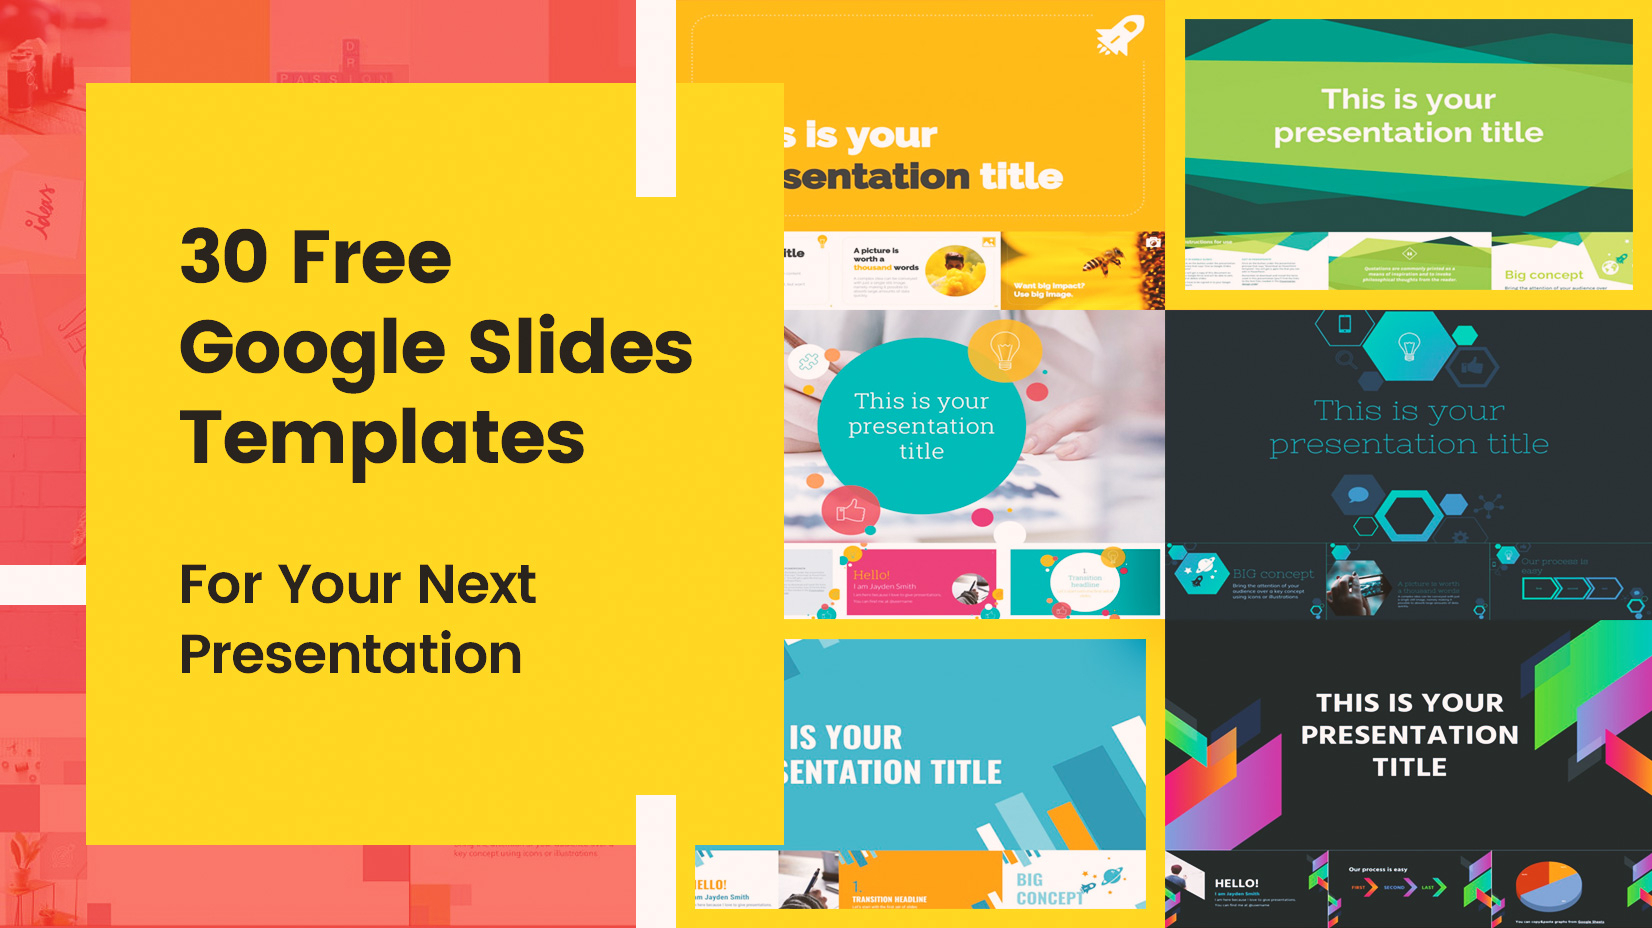 30-free-google-slides-templates-for-your-next-presentation-with-regard